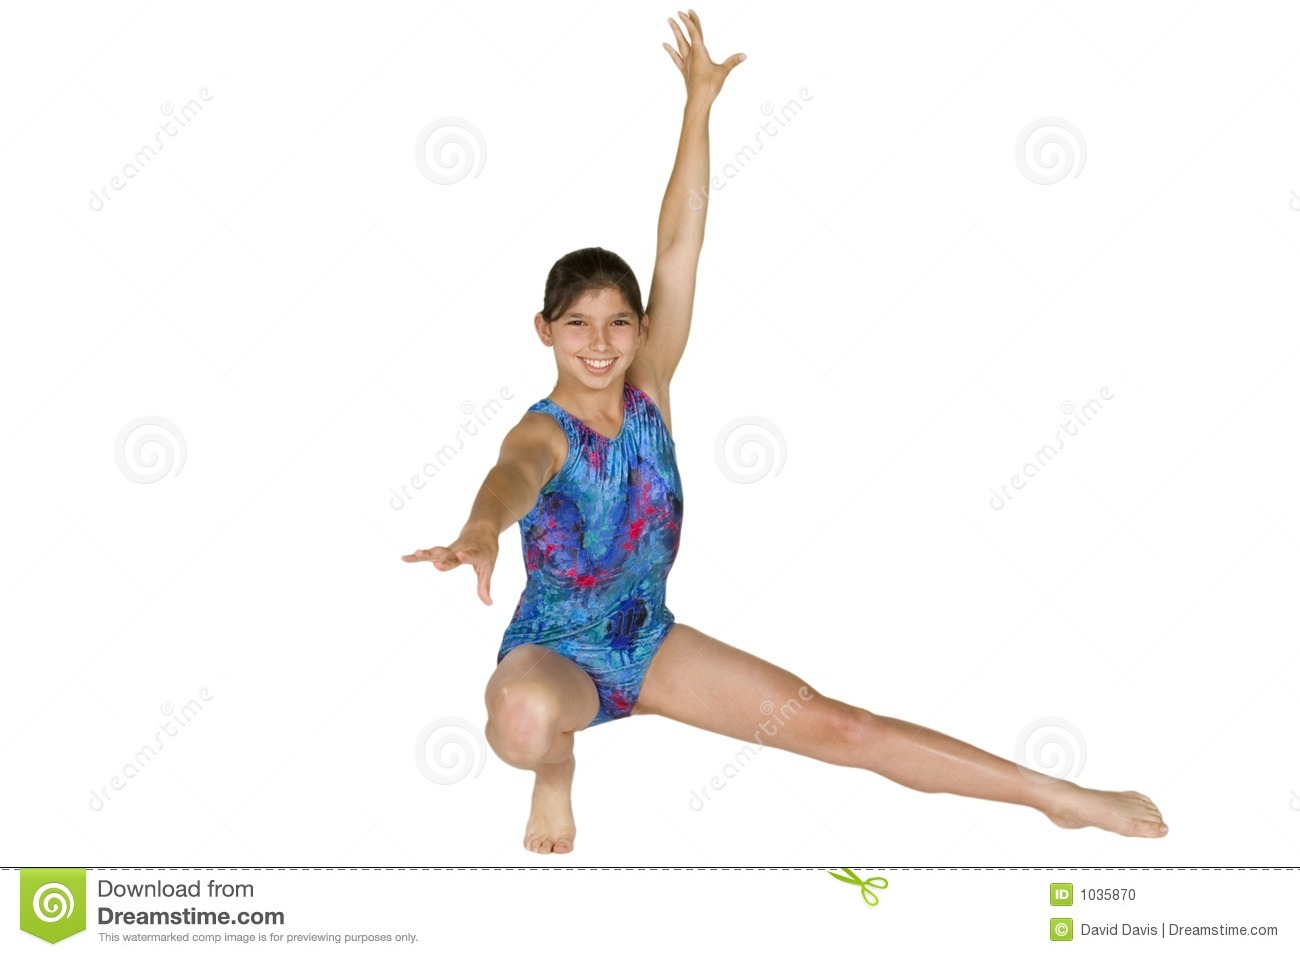 Model Release  280 12 Year Old Caucasian Girl In Gymnastics Poses